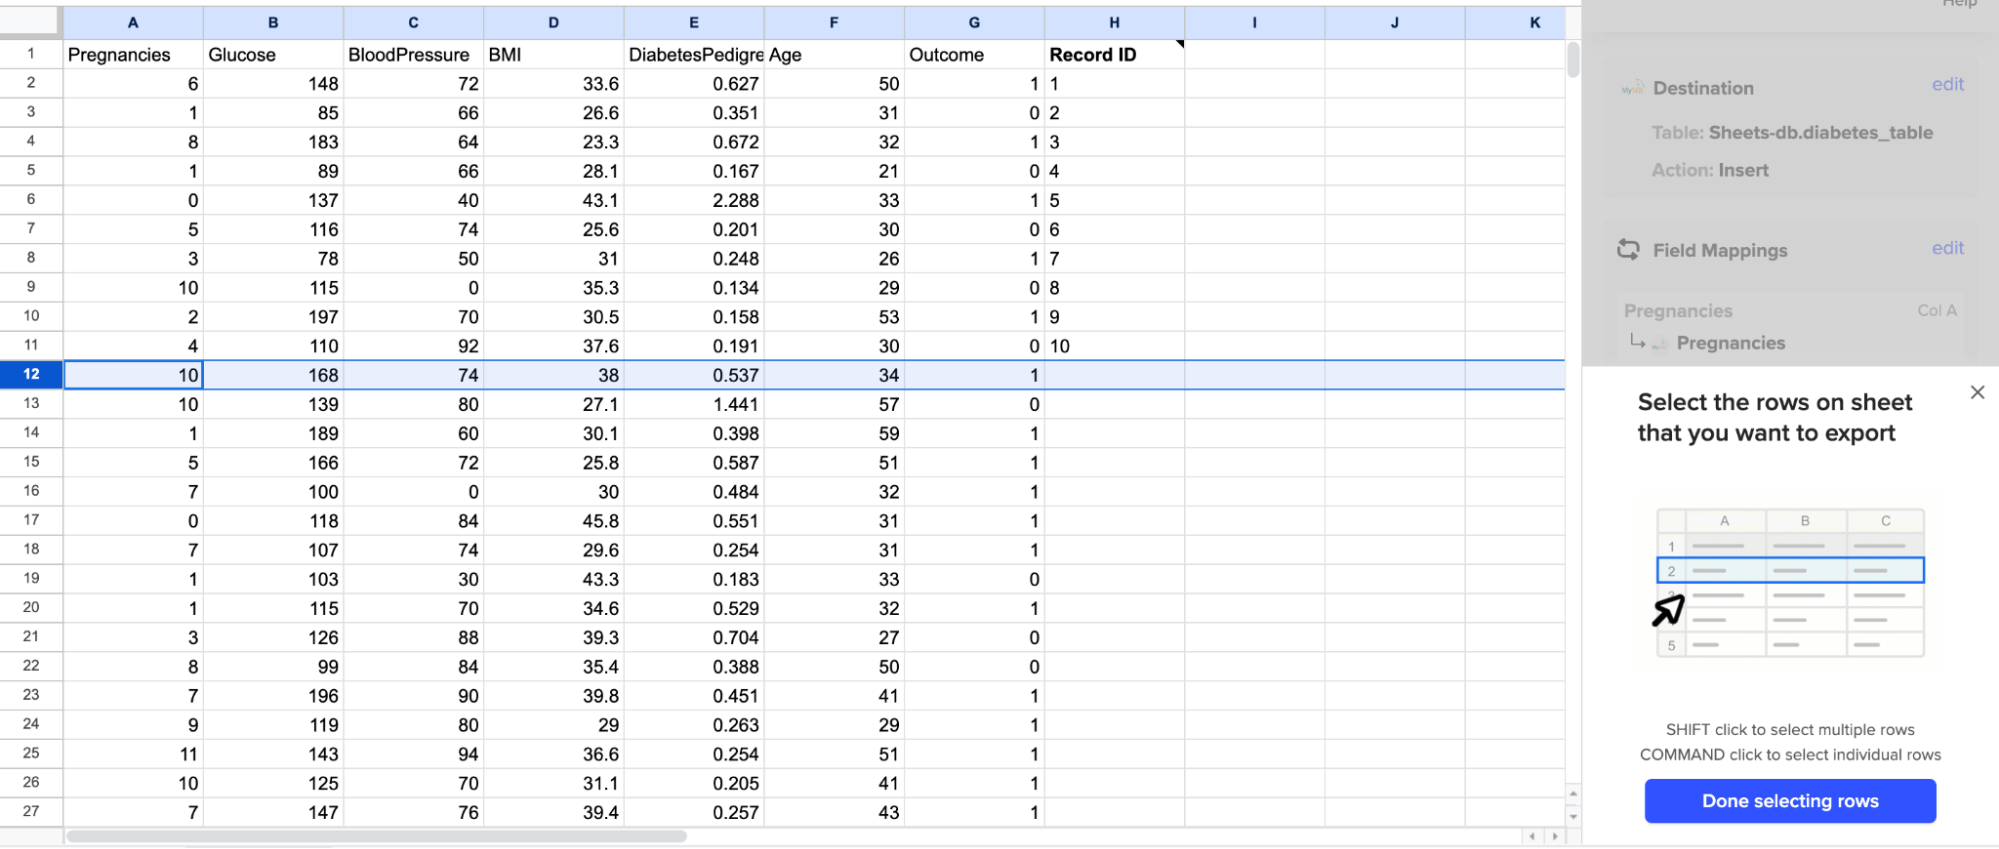 Google Sheets table shows the selection of row 12. The Done selecting rows button appears in the bottom right corner